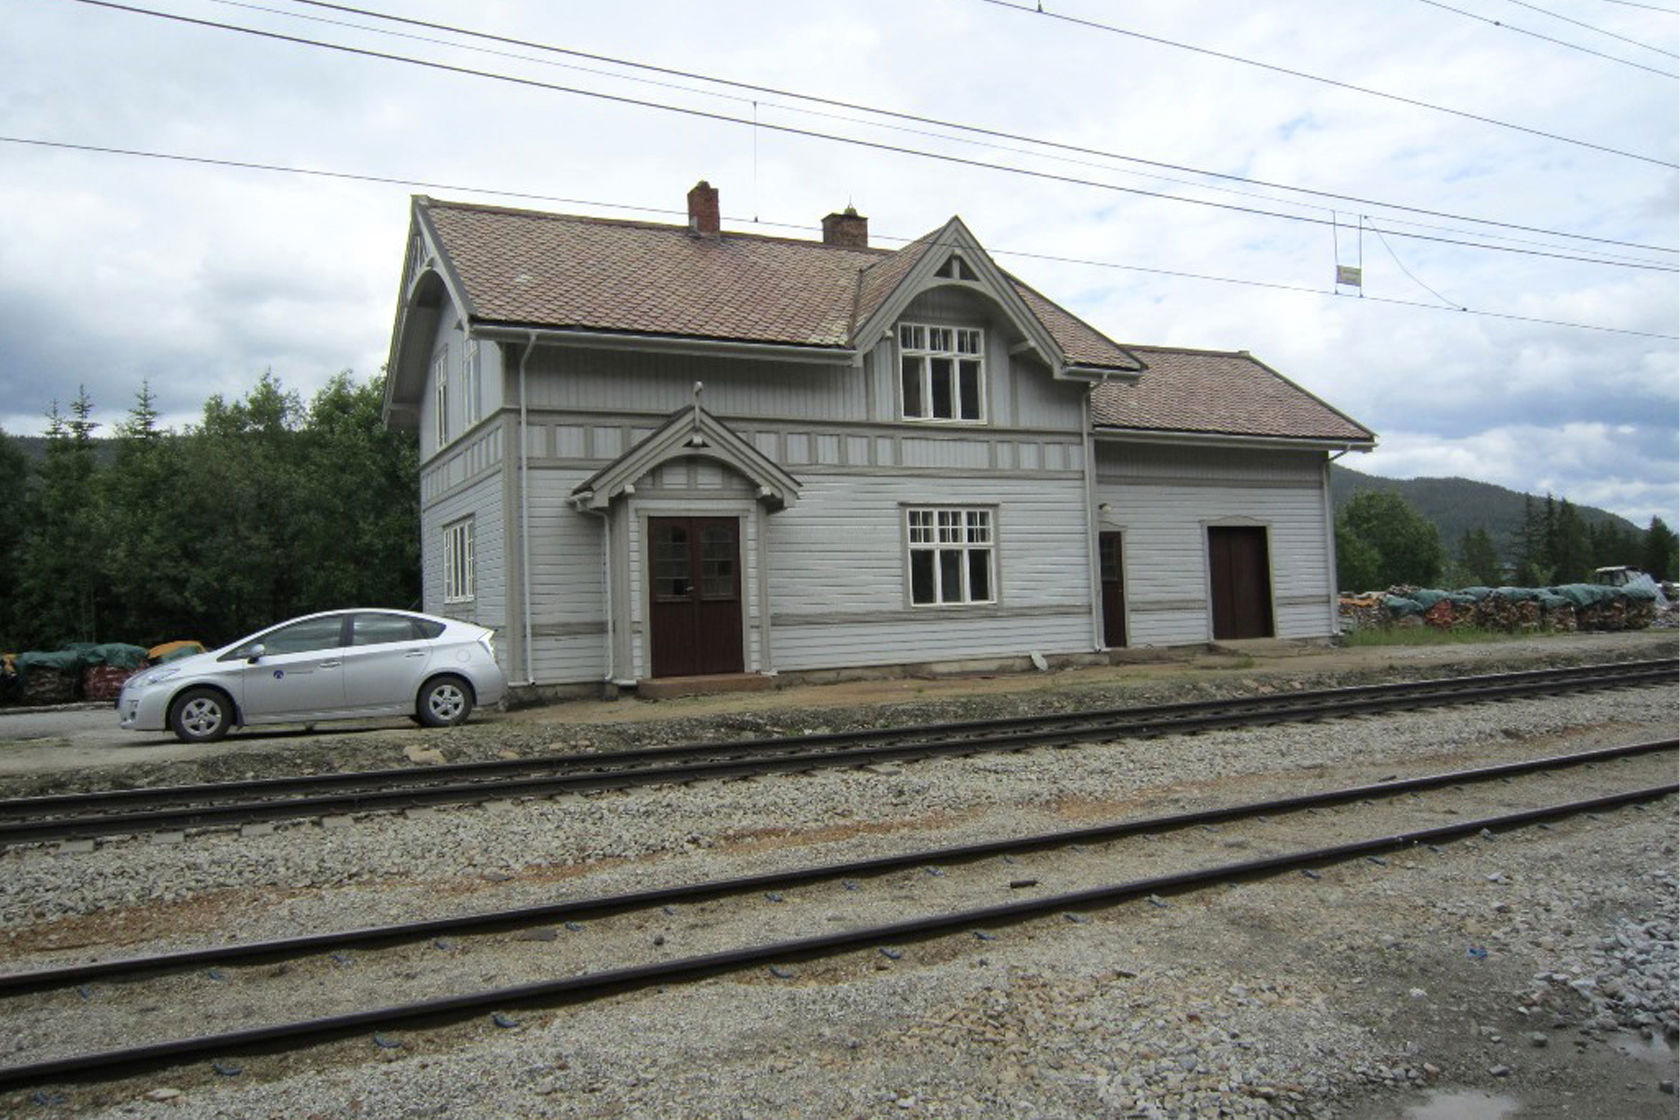 Tracks and station building at Hol station